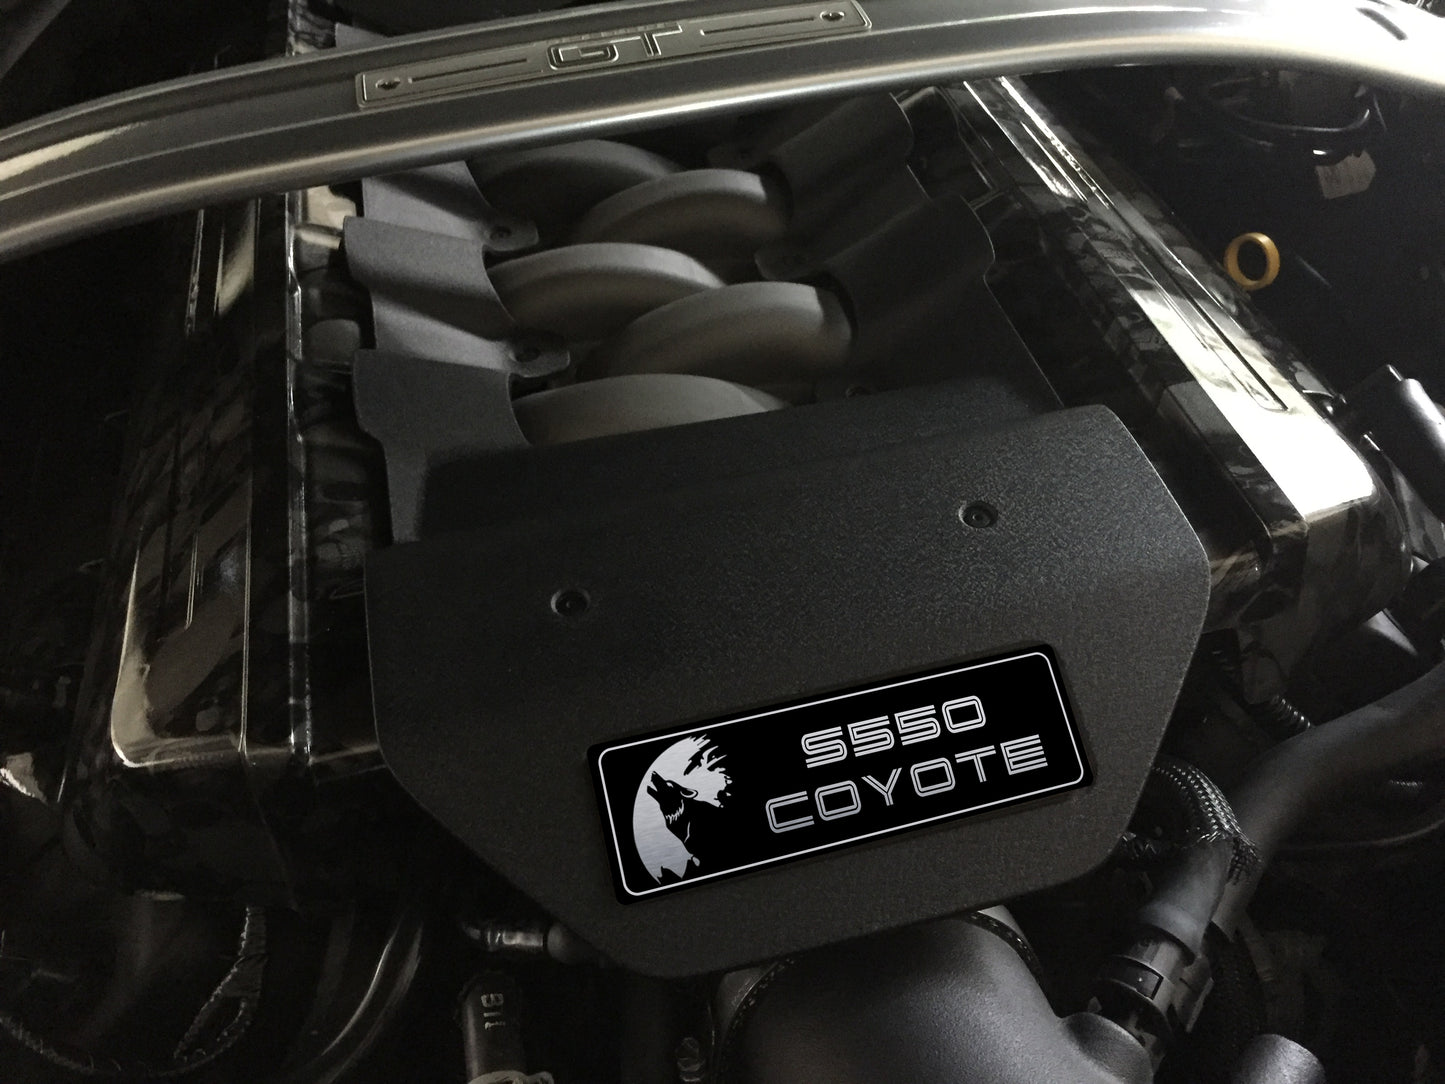 Aluminum Engine Cover Plate [S6] Moon S550 Coyote (2015-2017 Mustang)